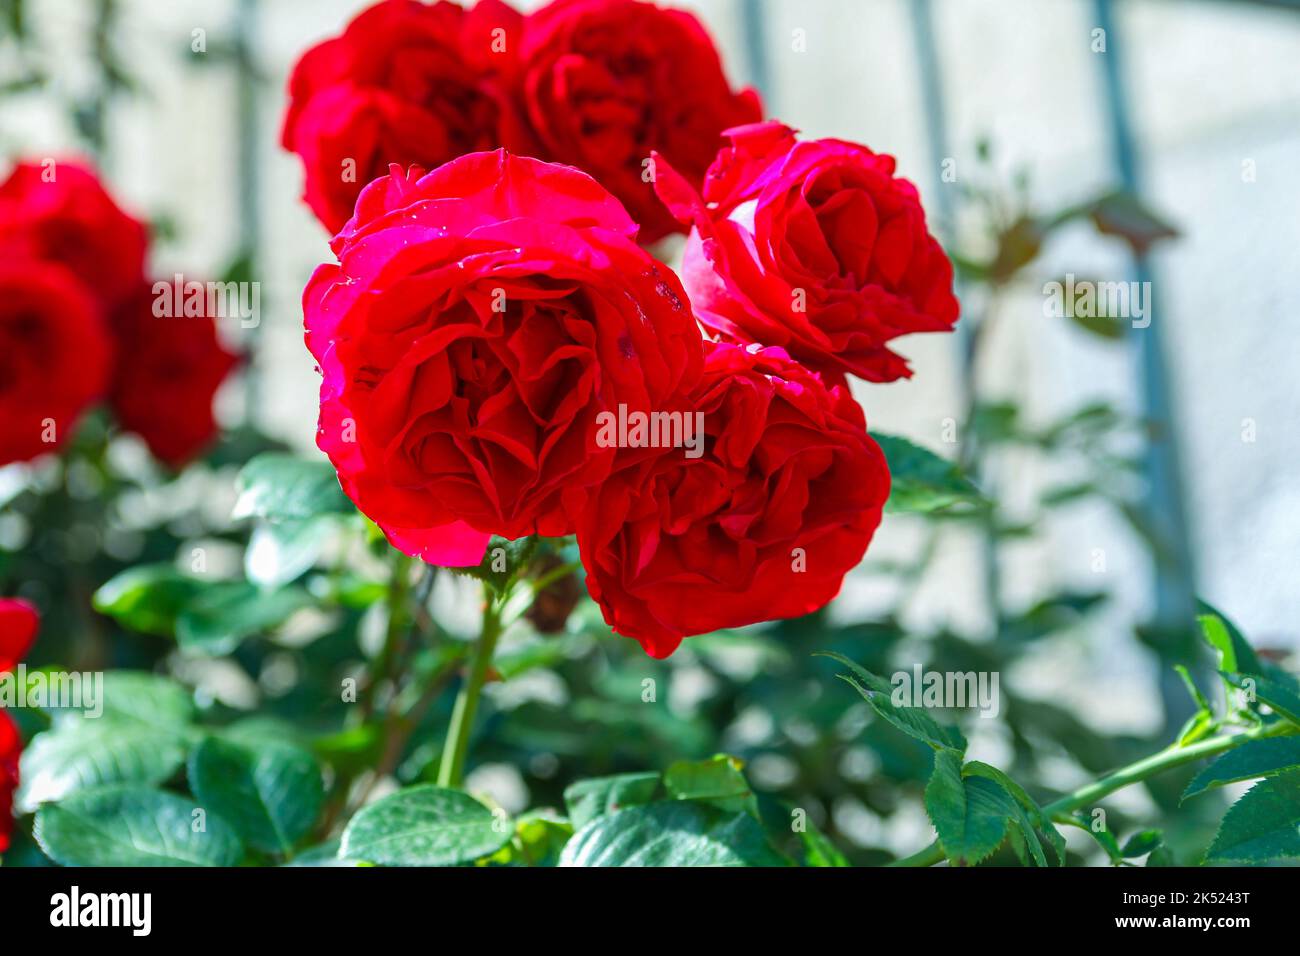 Rose with 5 red flowers on one stem Stock Photo